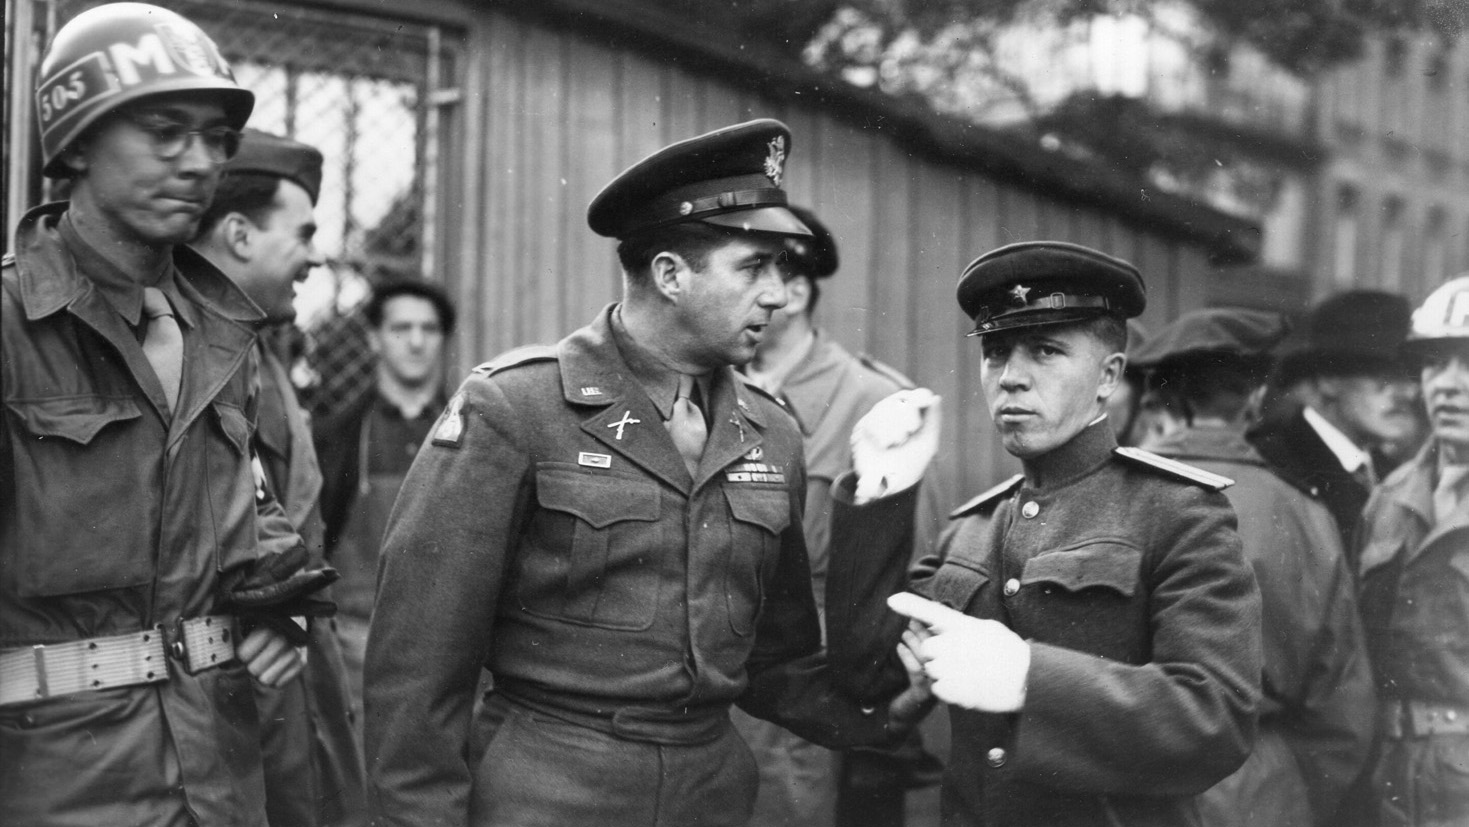 Colonel Bill Yarborough communicates with an officer of the Soviet Red Army while working as the military police chief in postwar Vienna, Austria.